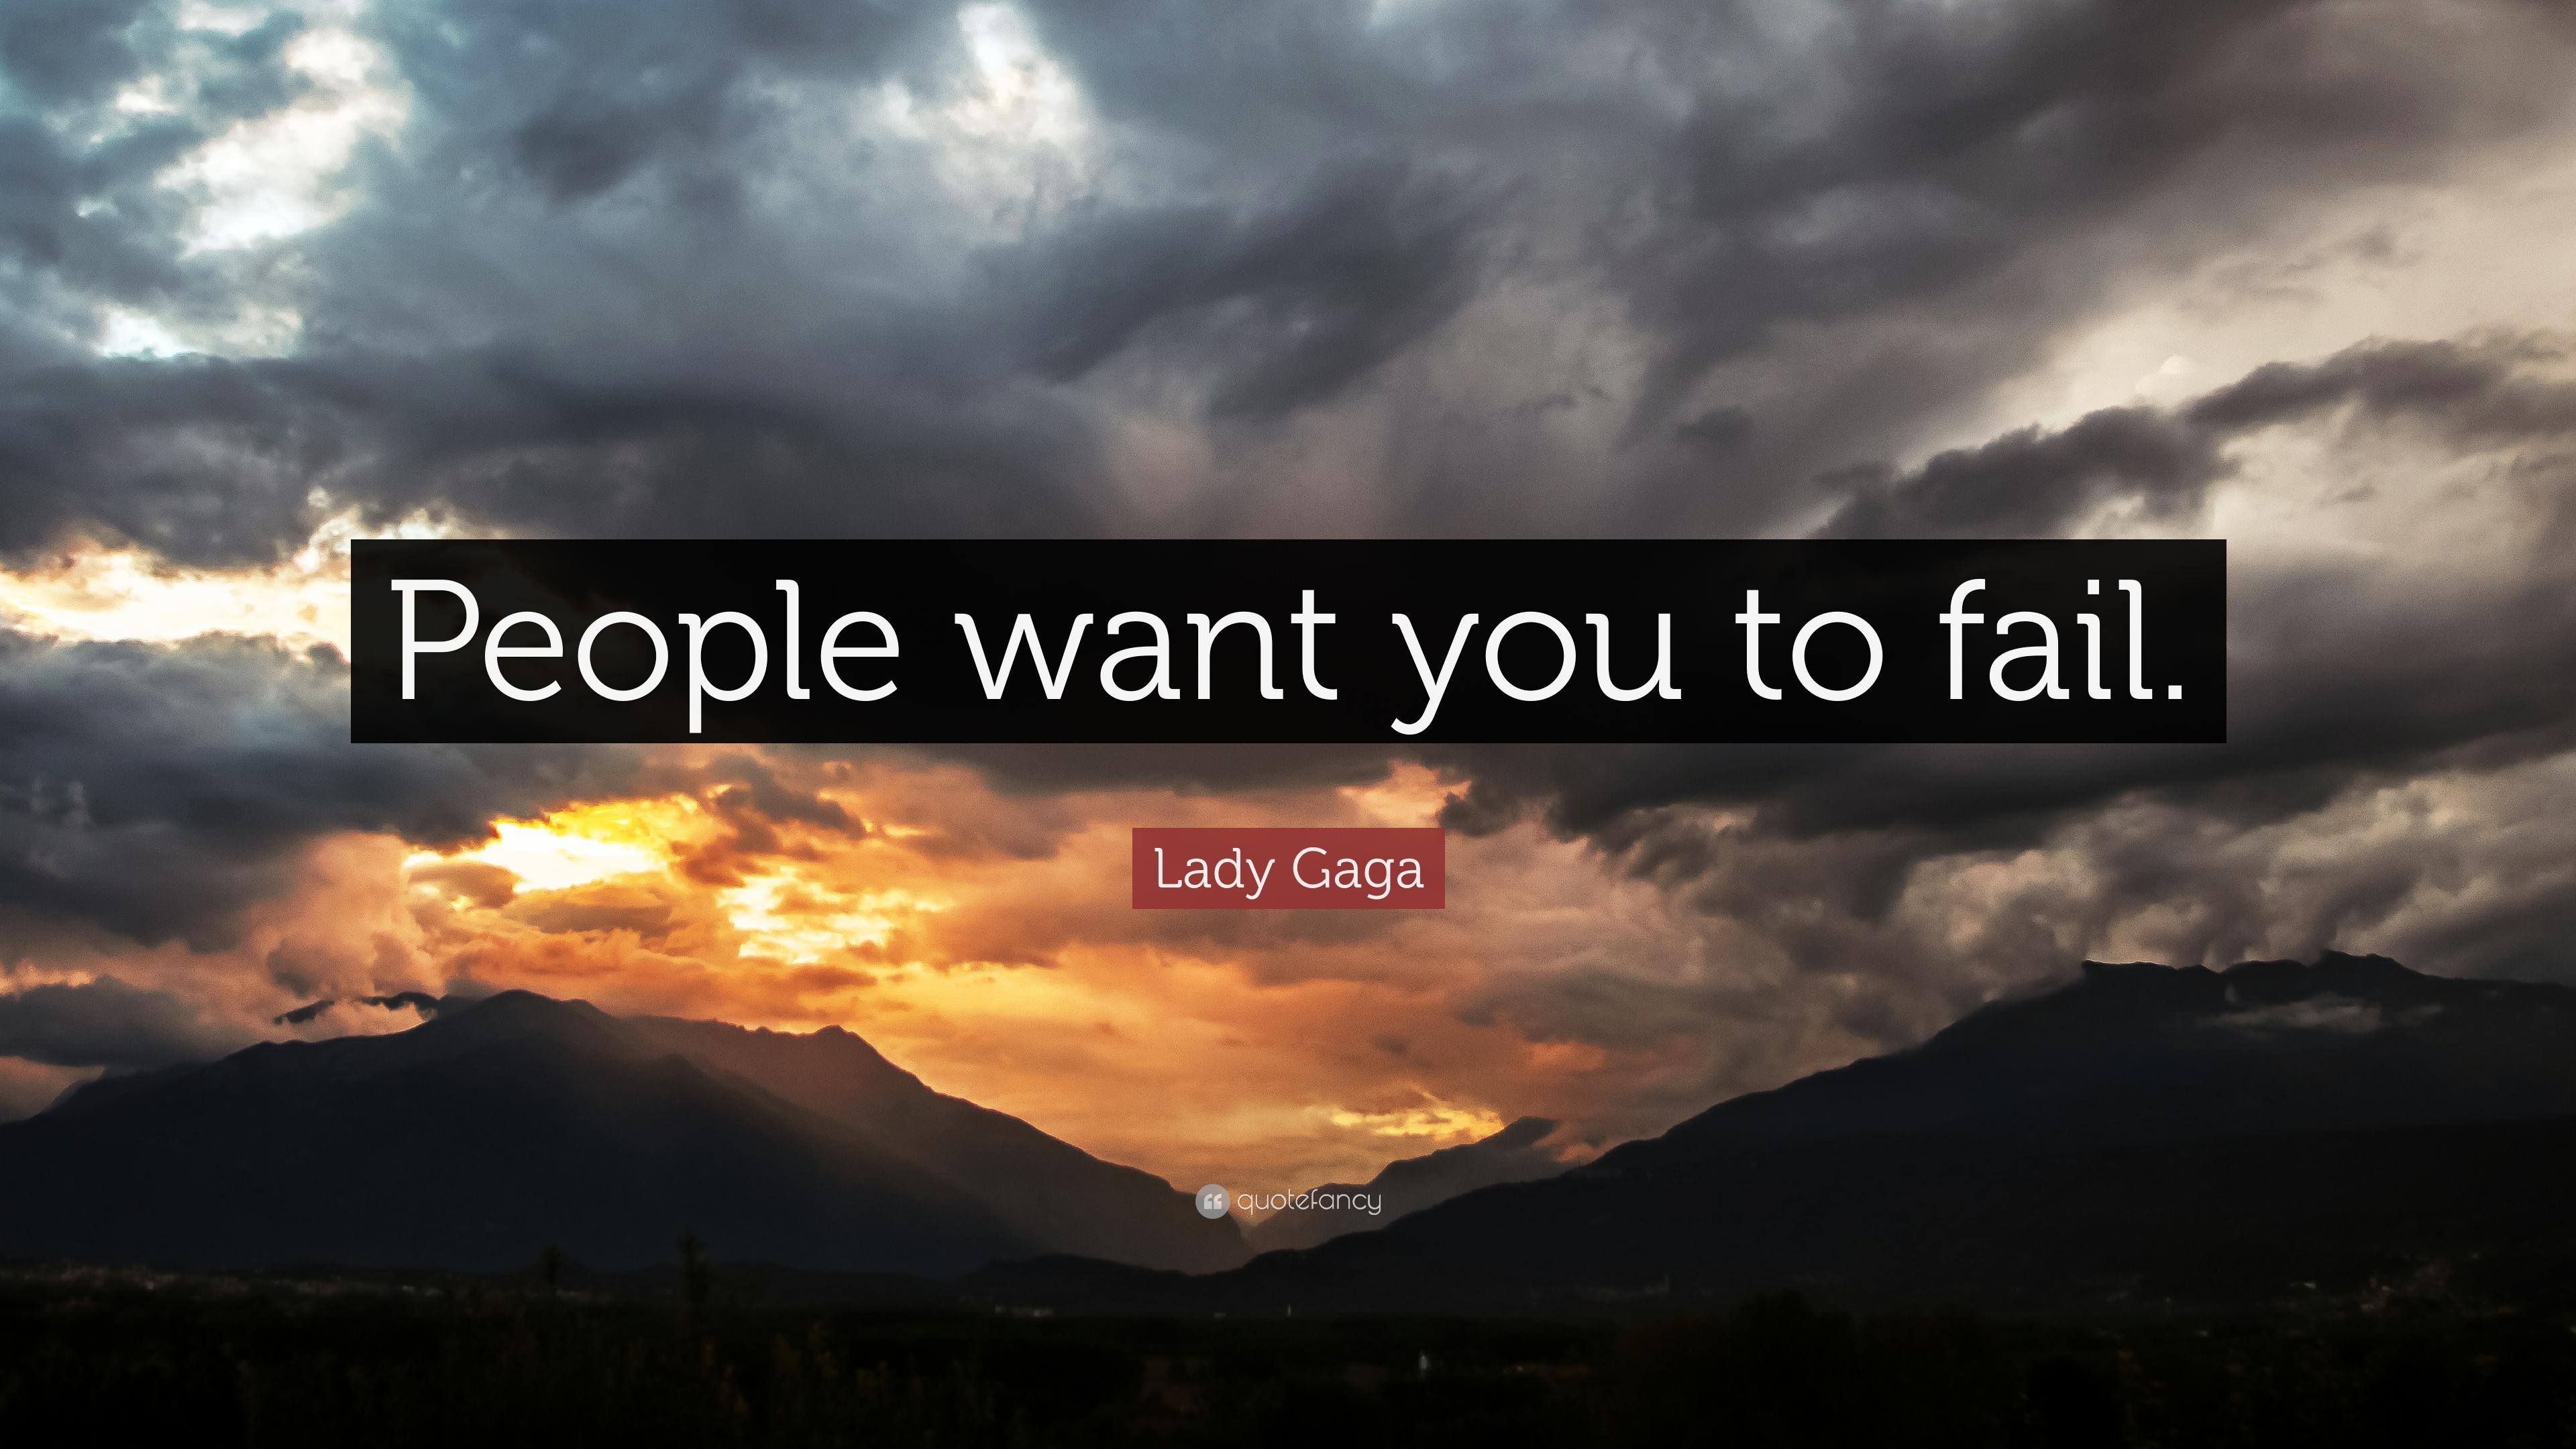 Lady Gaga Quote: “People want you to fail.” 10 wallpaper